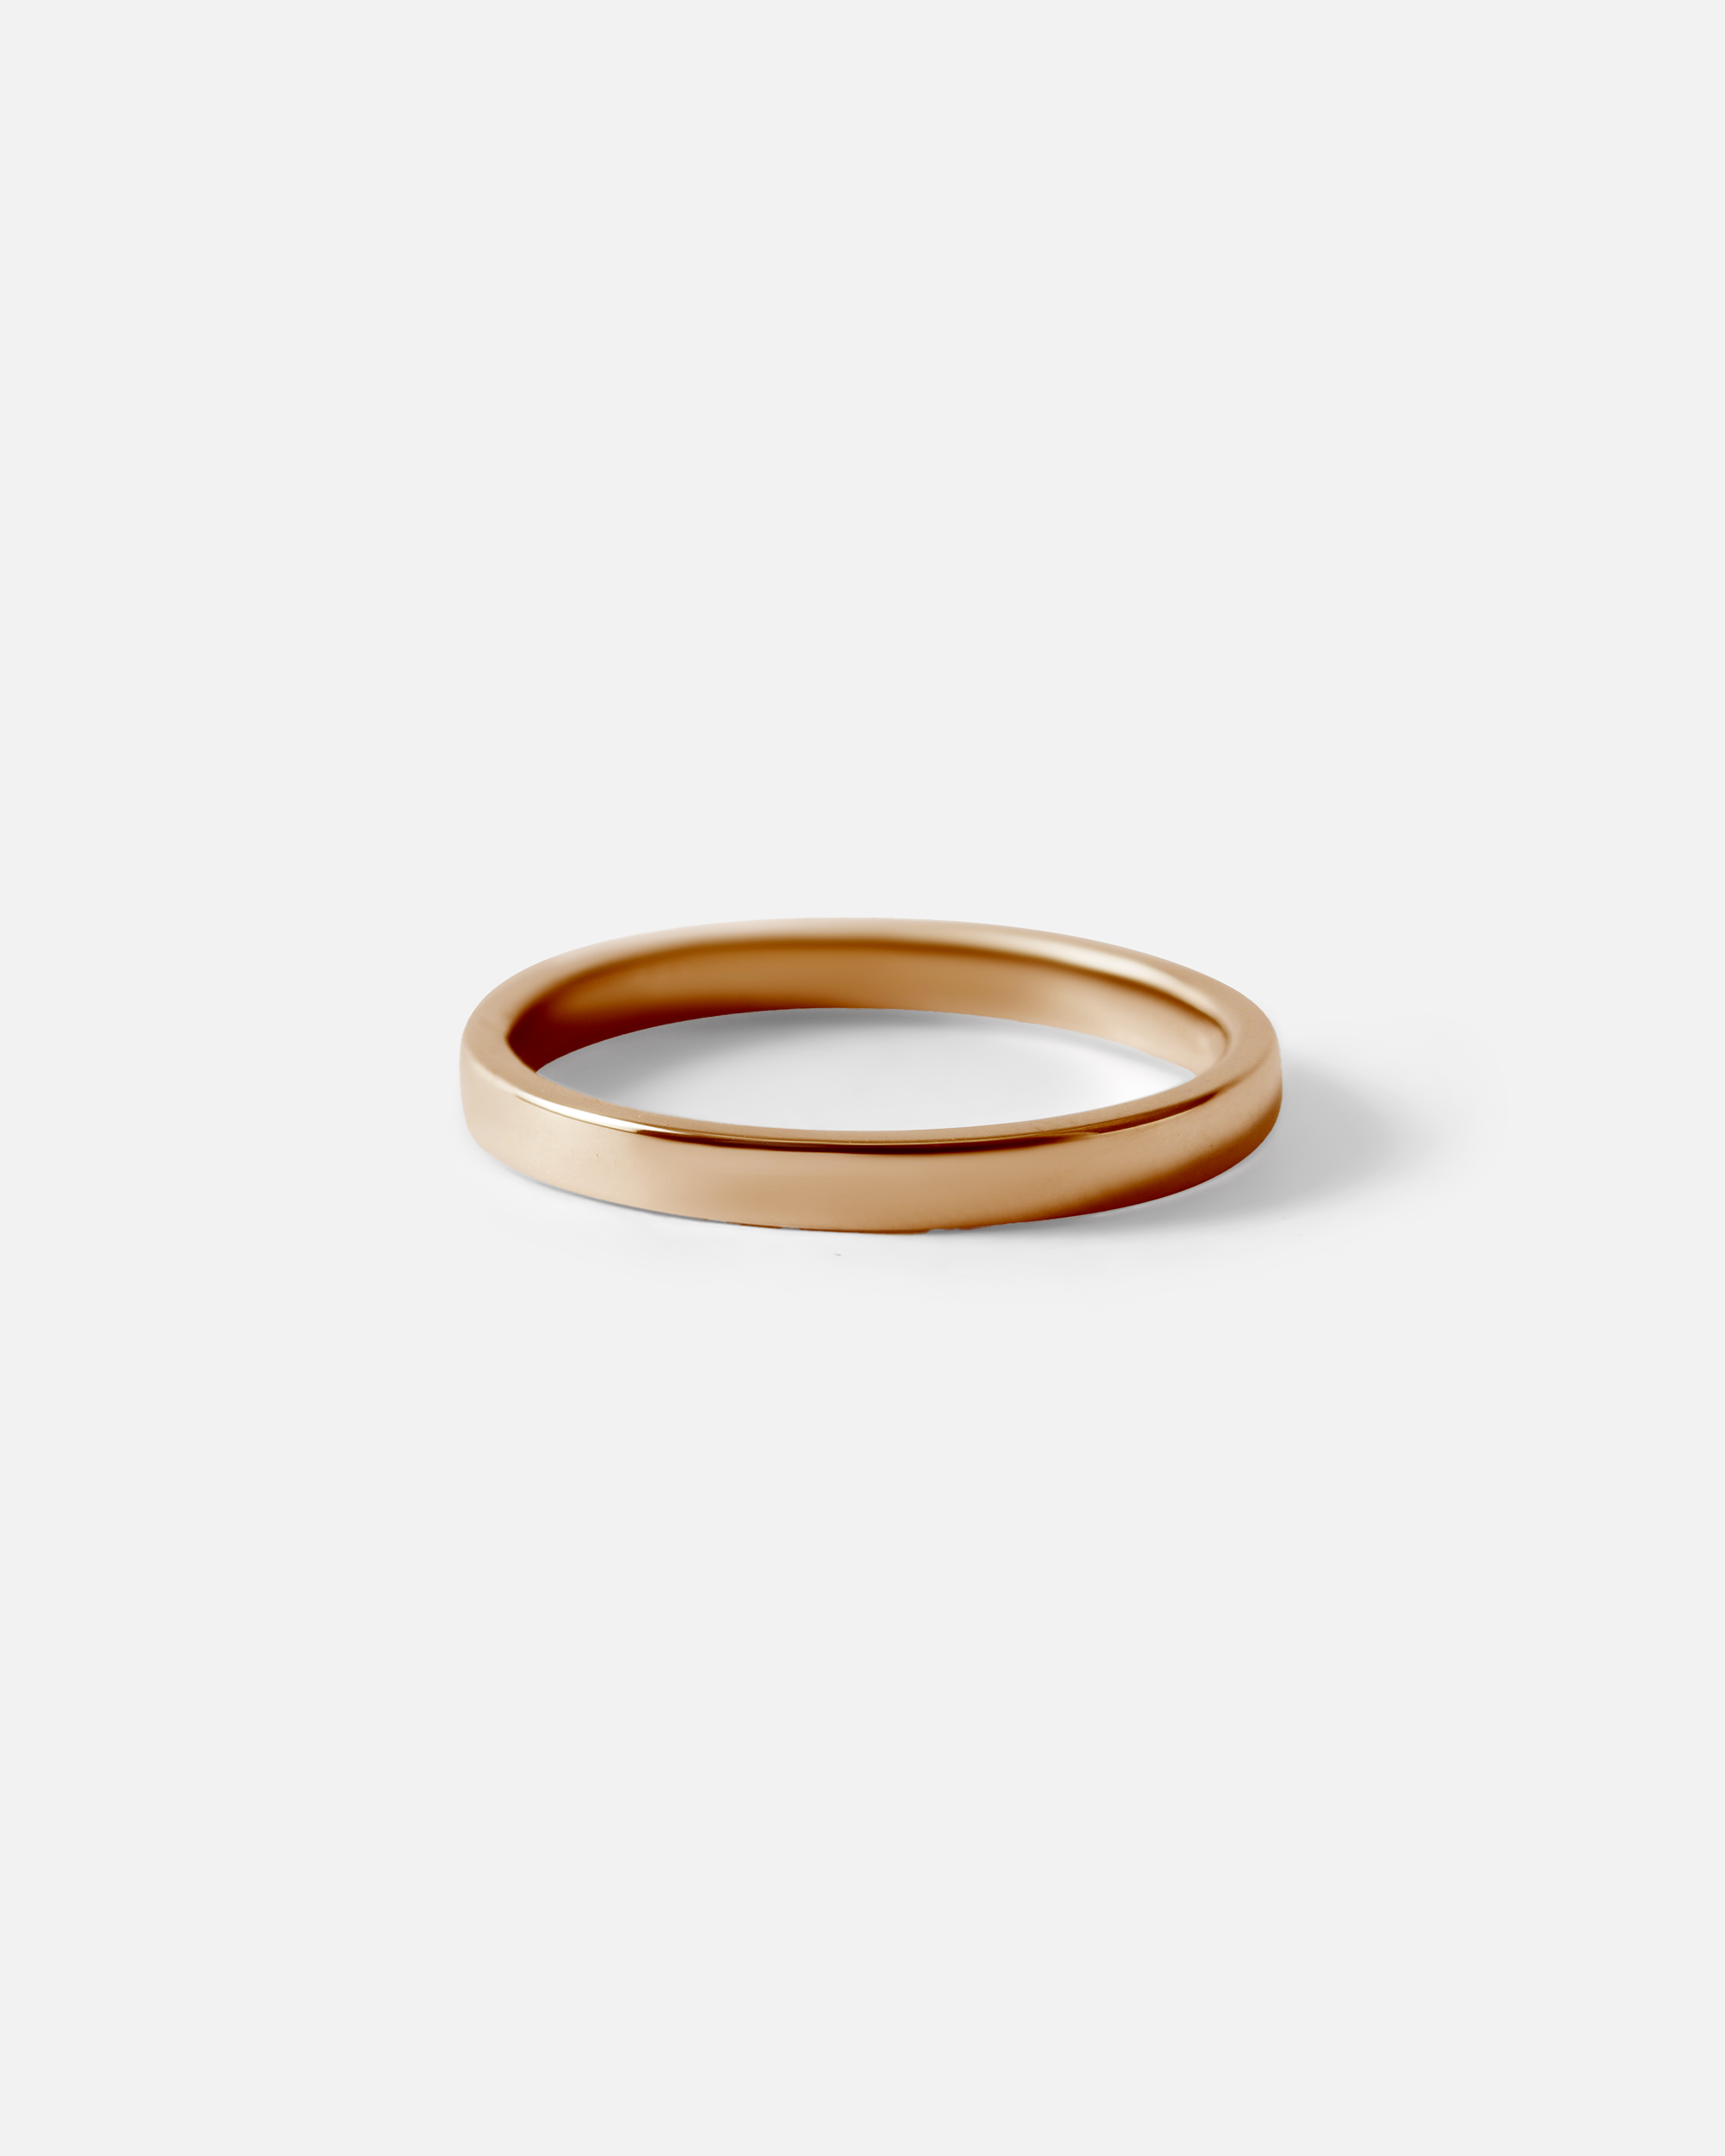 Angled view of Flat Band / 2mm Customizable By Hiroyo in 18k rose gold